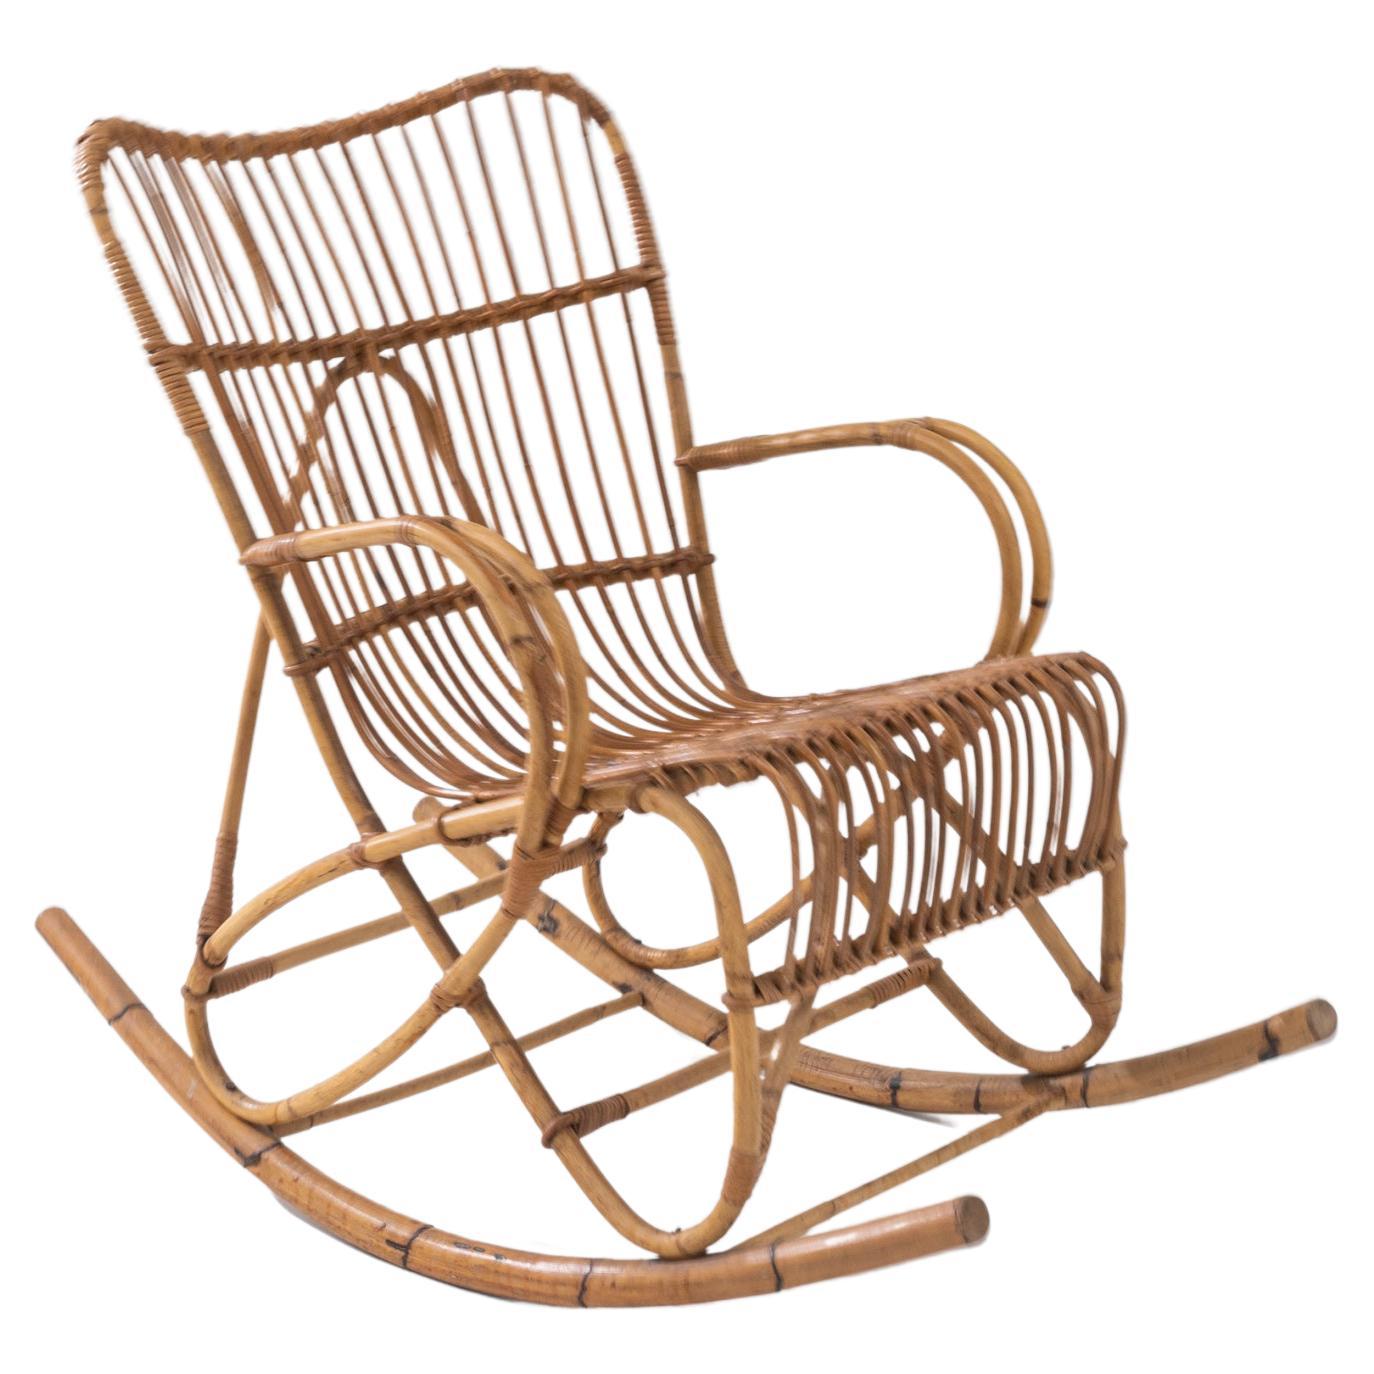 1960s French Rattan Rocking Chair For Sale at 1stDibs